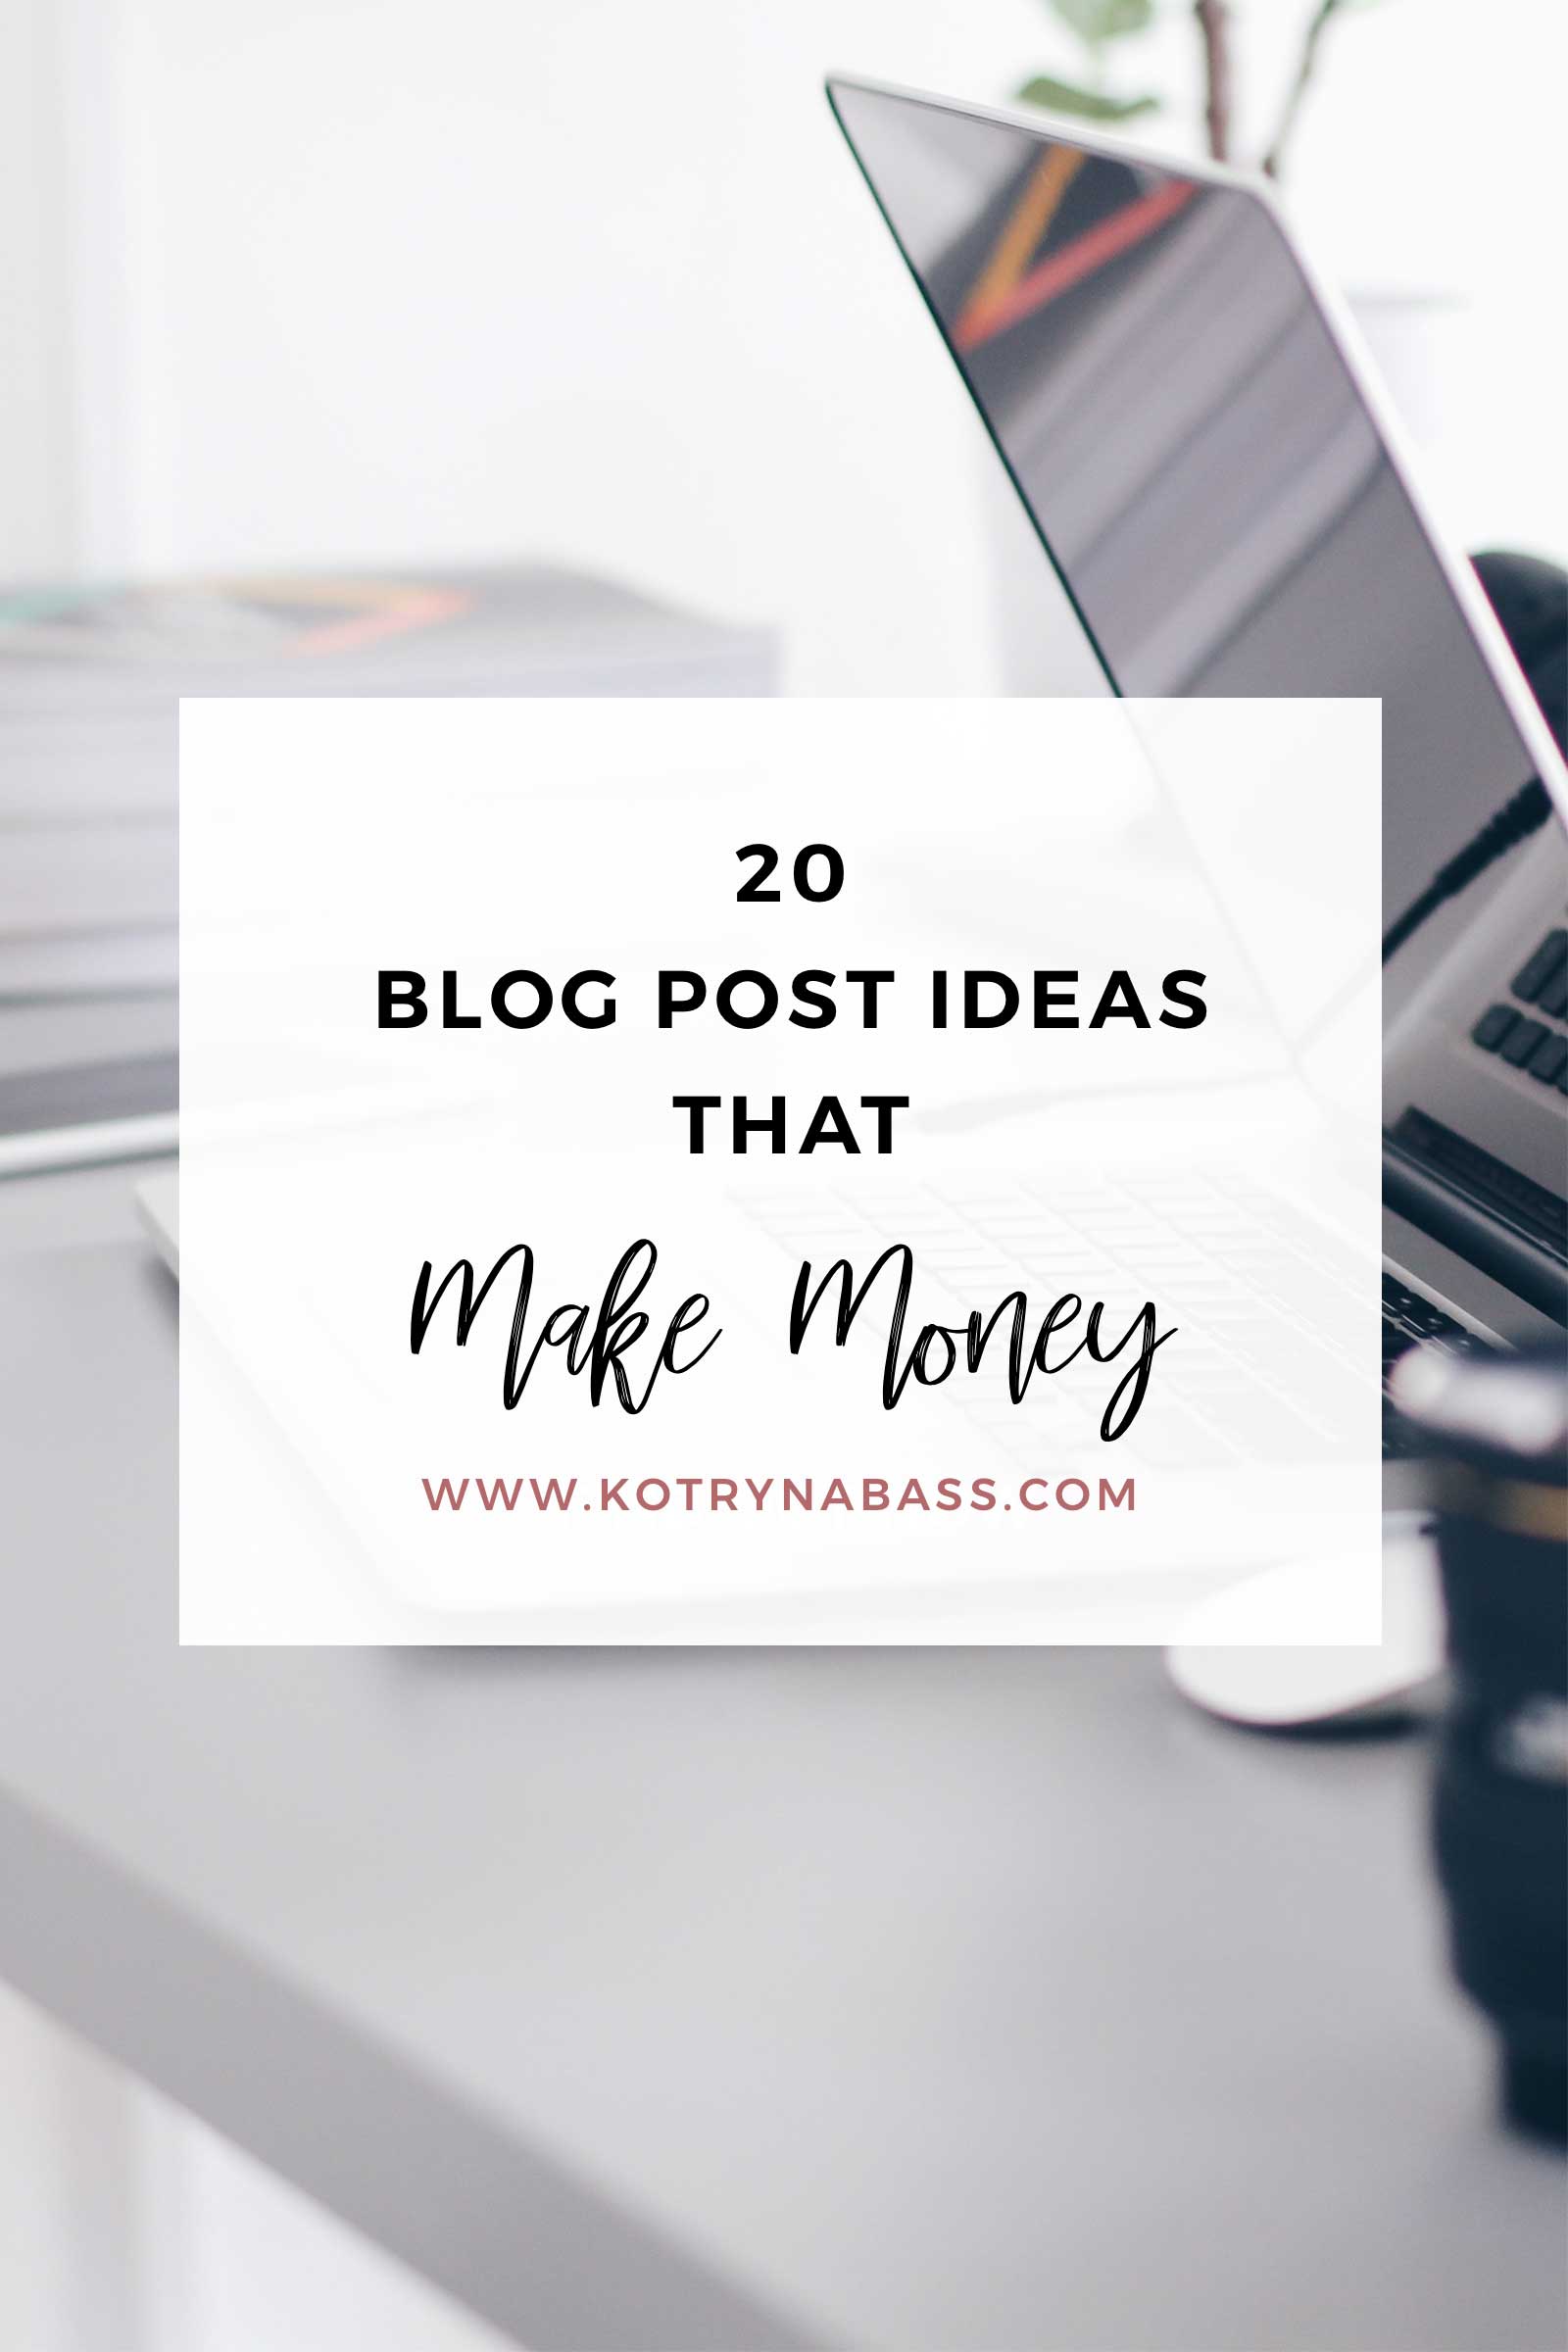 Coming up with blog post ideas that make money is not an easy task. Especially when you're just starting out- brainstorming what you should write about can be a bit overwhelming. Thus, in this post, I decided to share 20 profitable blog post ideas that you can use in order to start making money off your blog.